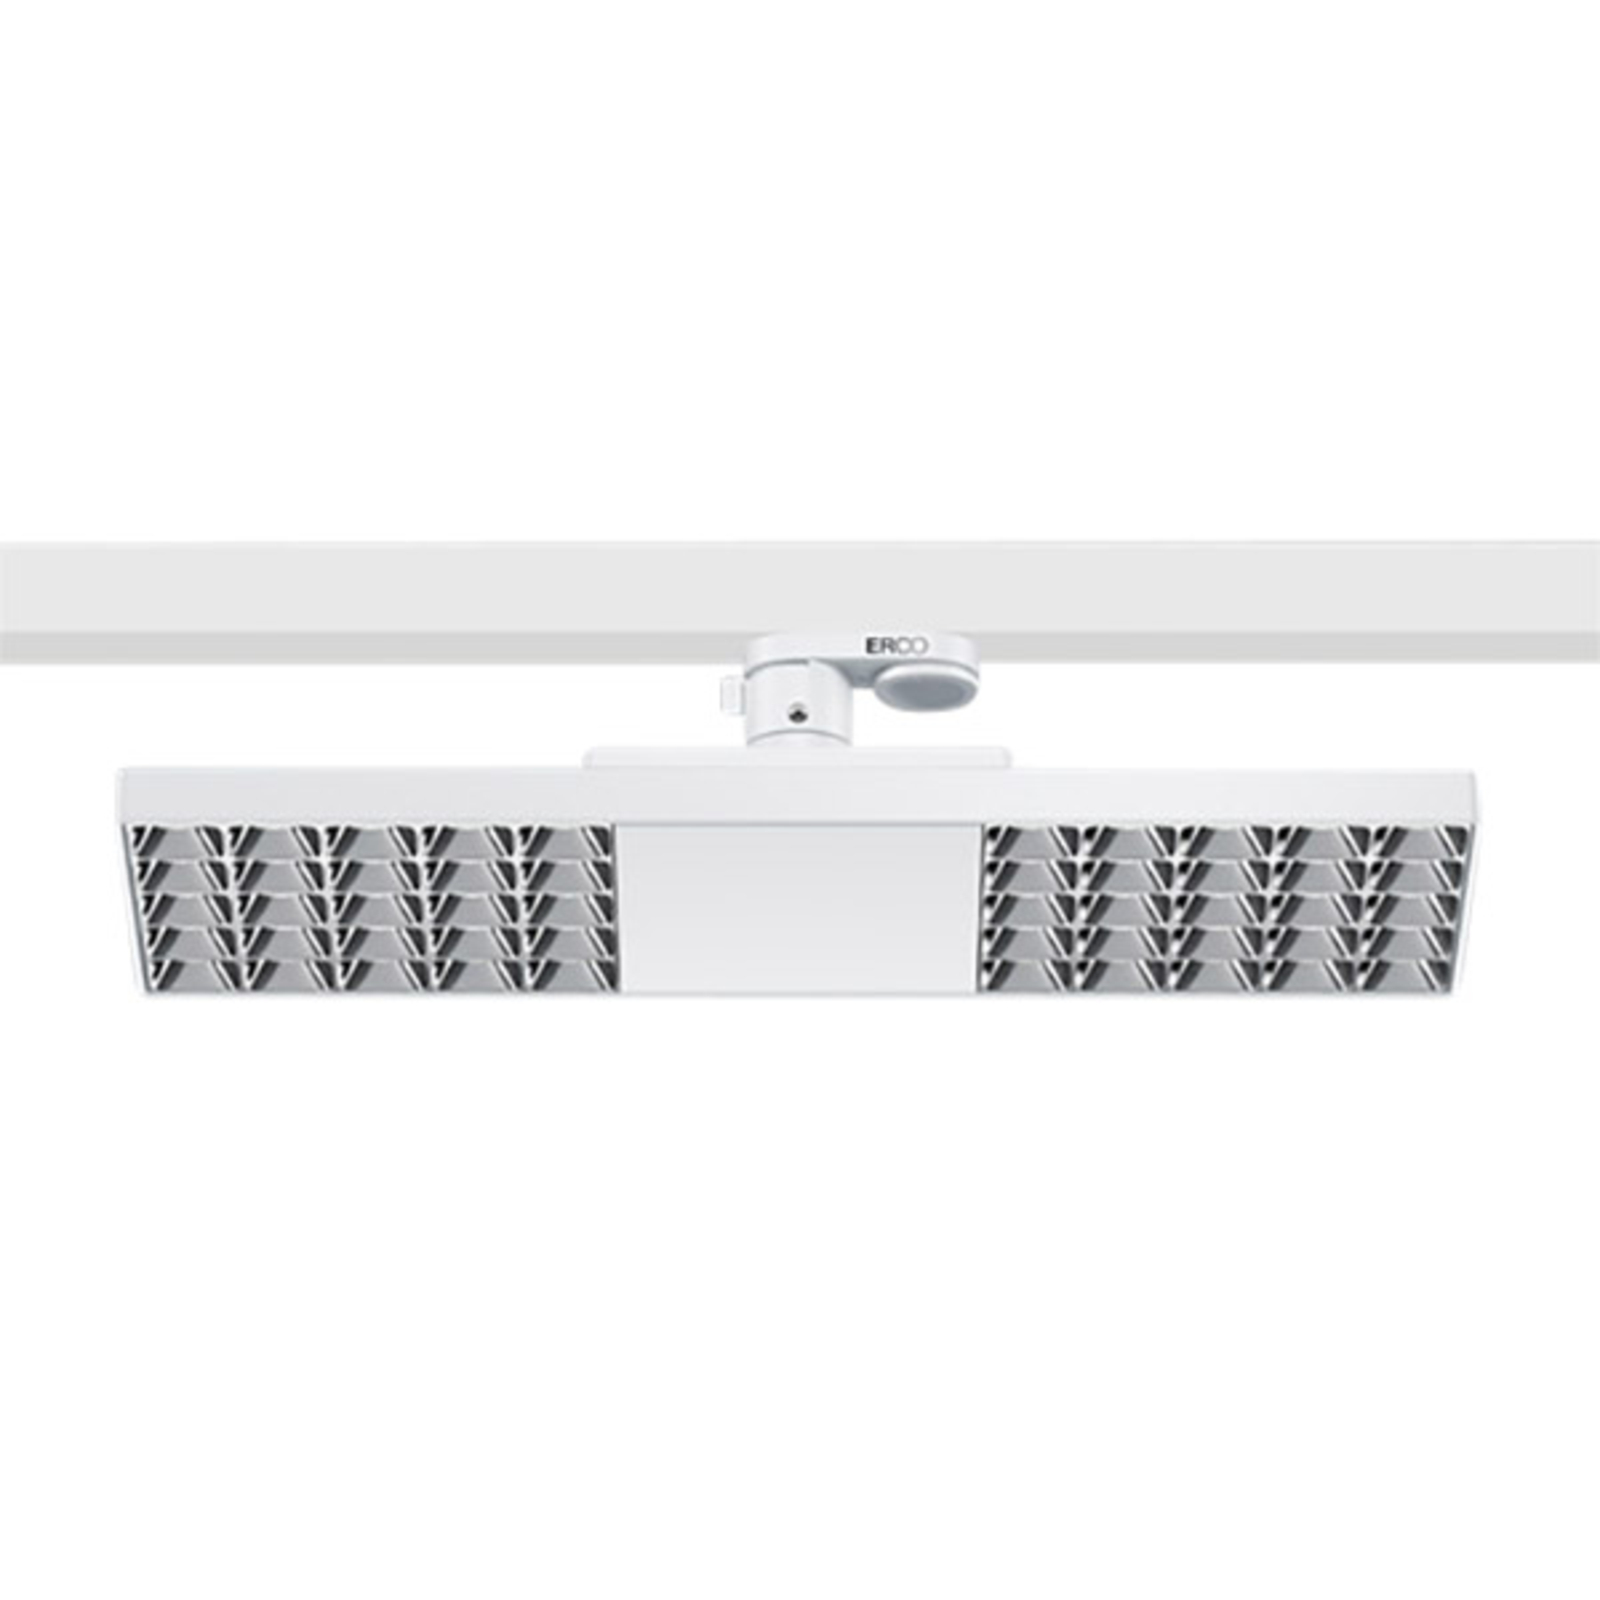 ERCO Jilly 230 V 15W extra wide 840 white/silver